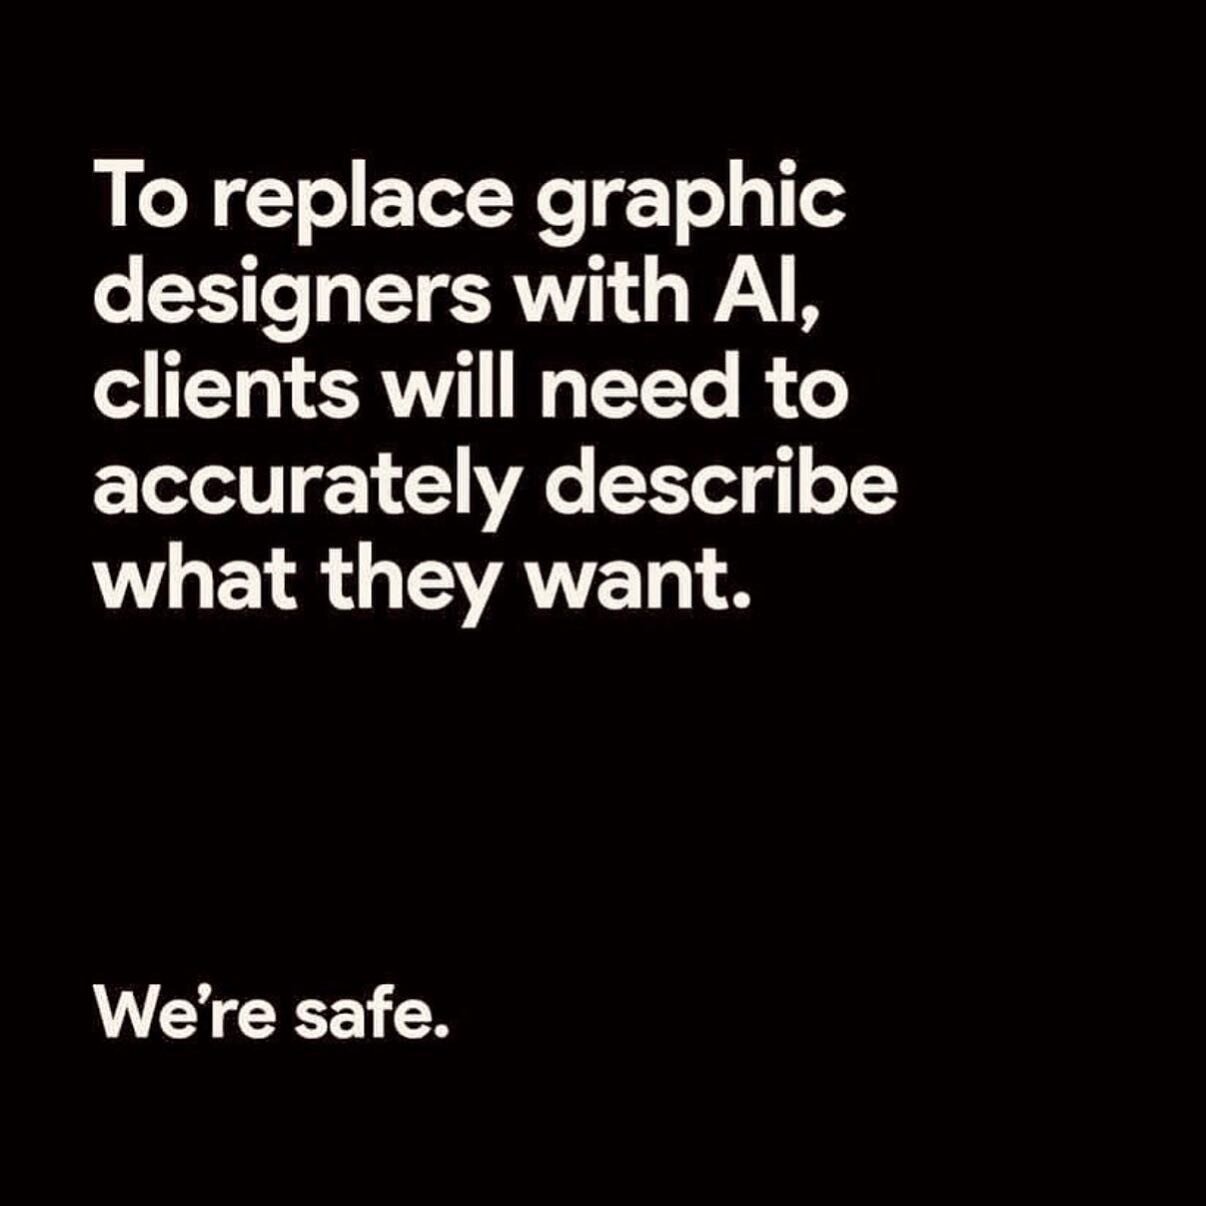 We are safe. Just saying ❤️

#humor #ai #graphicdesigners